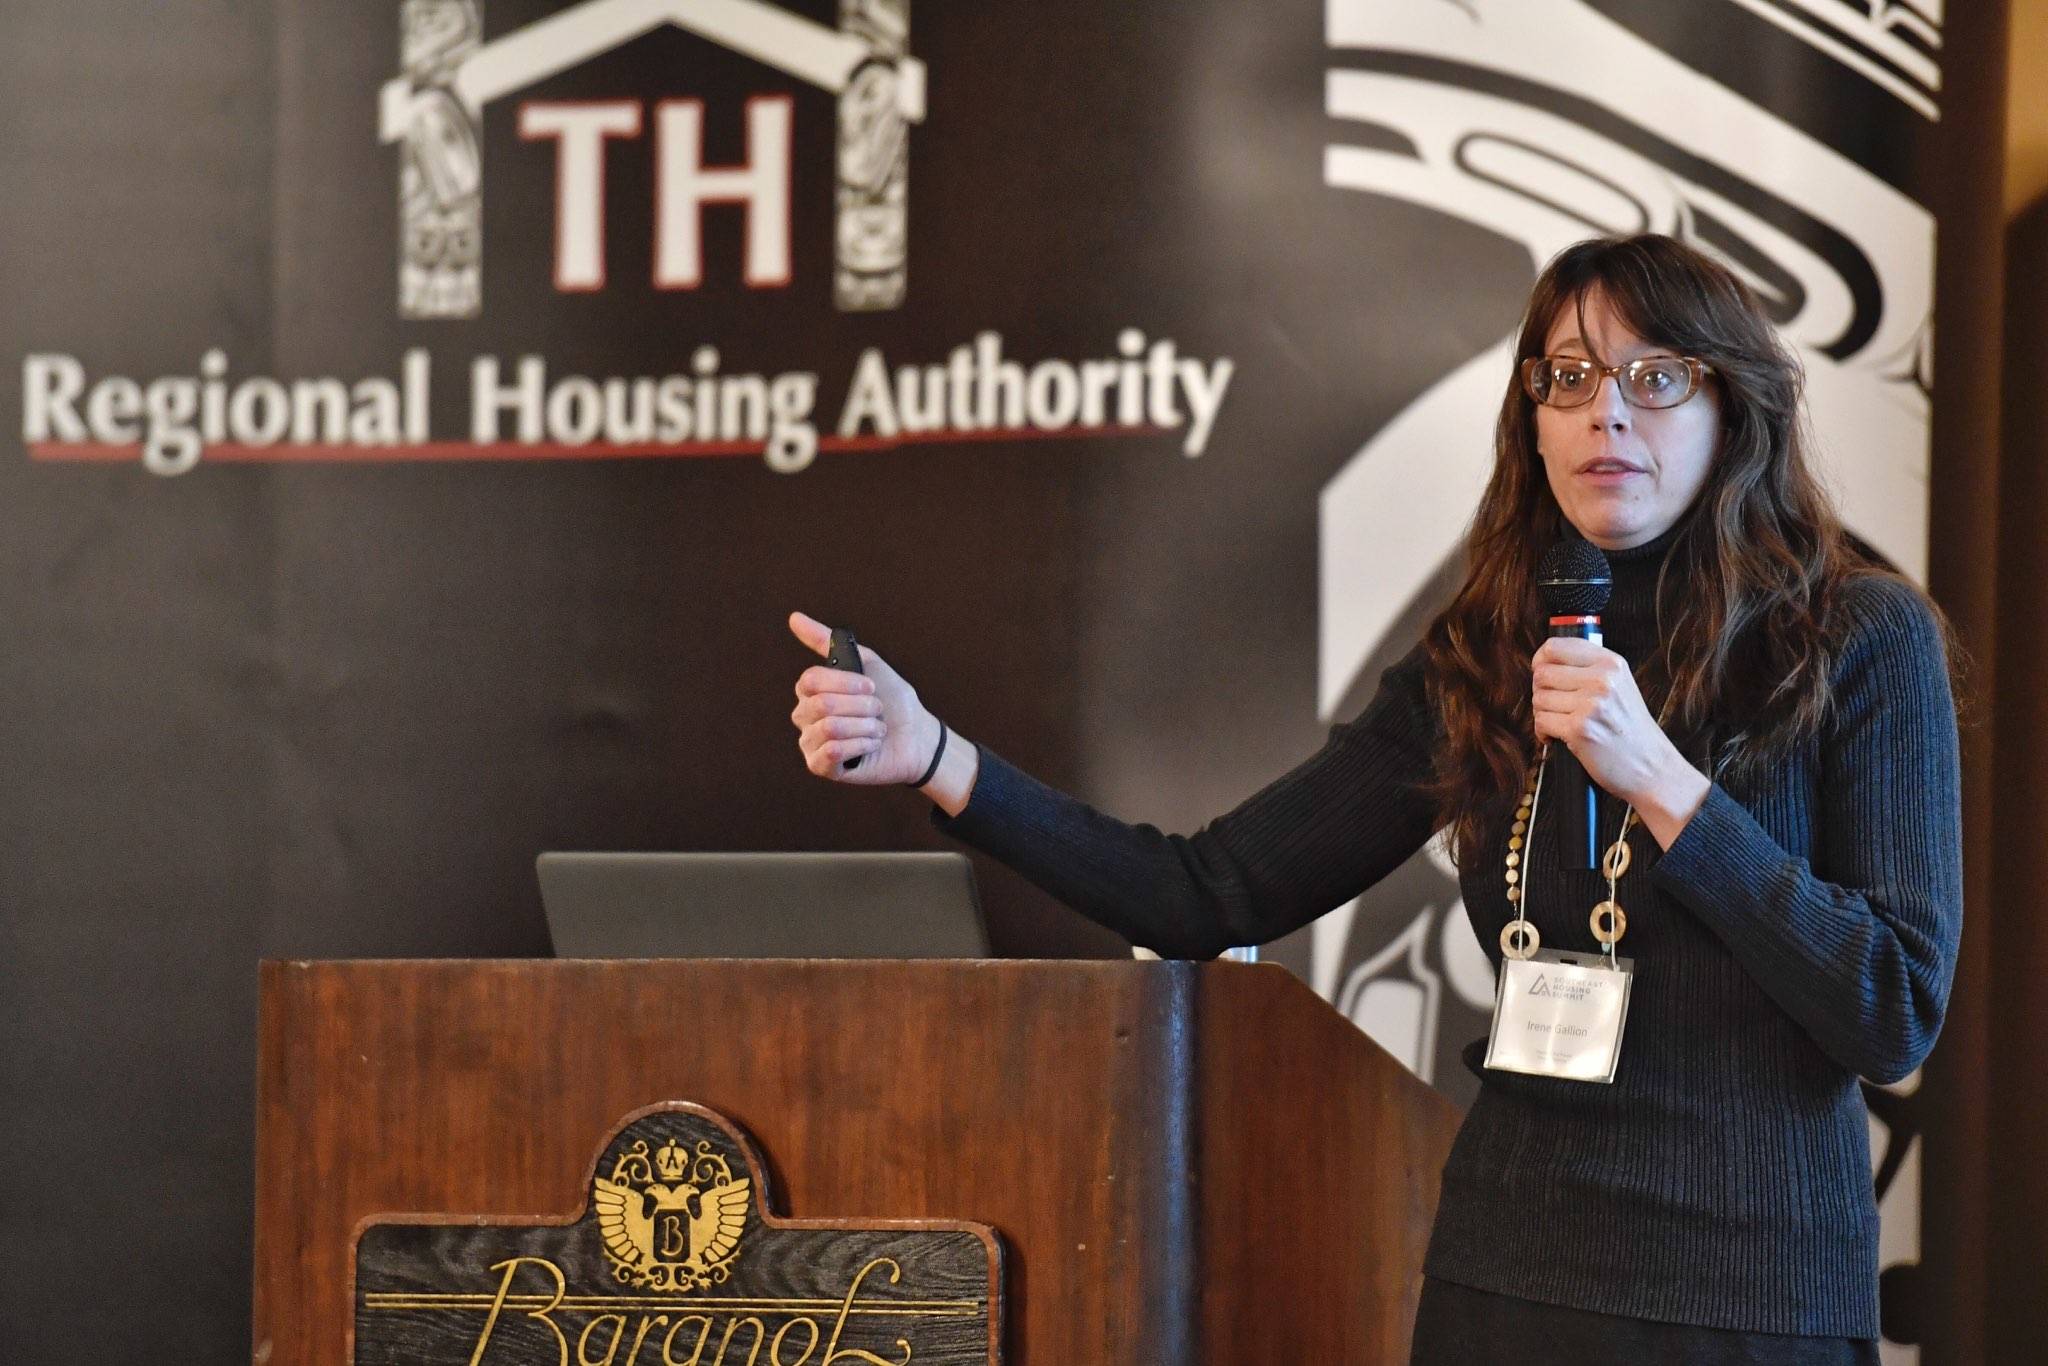 Irene Gallion, housing and homelessness services coordinator for the City and Borough of Juneau, speaks at the Southeast Housing Summit at the Baranof Hotel on Wednesday, March 13, 2019. The summit is a two-day program organized by the Tlingit and Haida Regional Housing Authority. (Michael Penn | Juneau Empire)